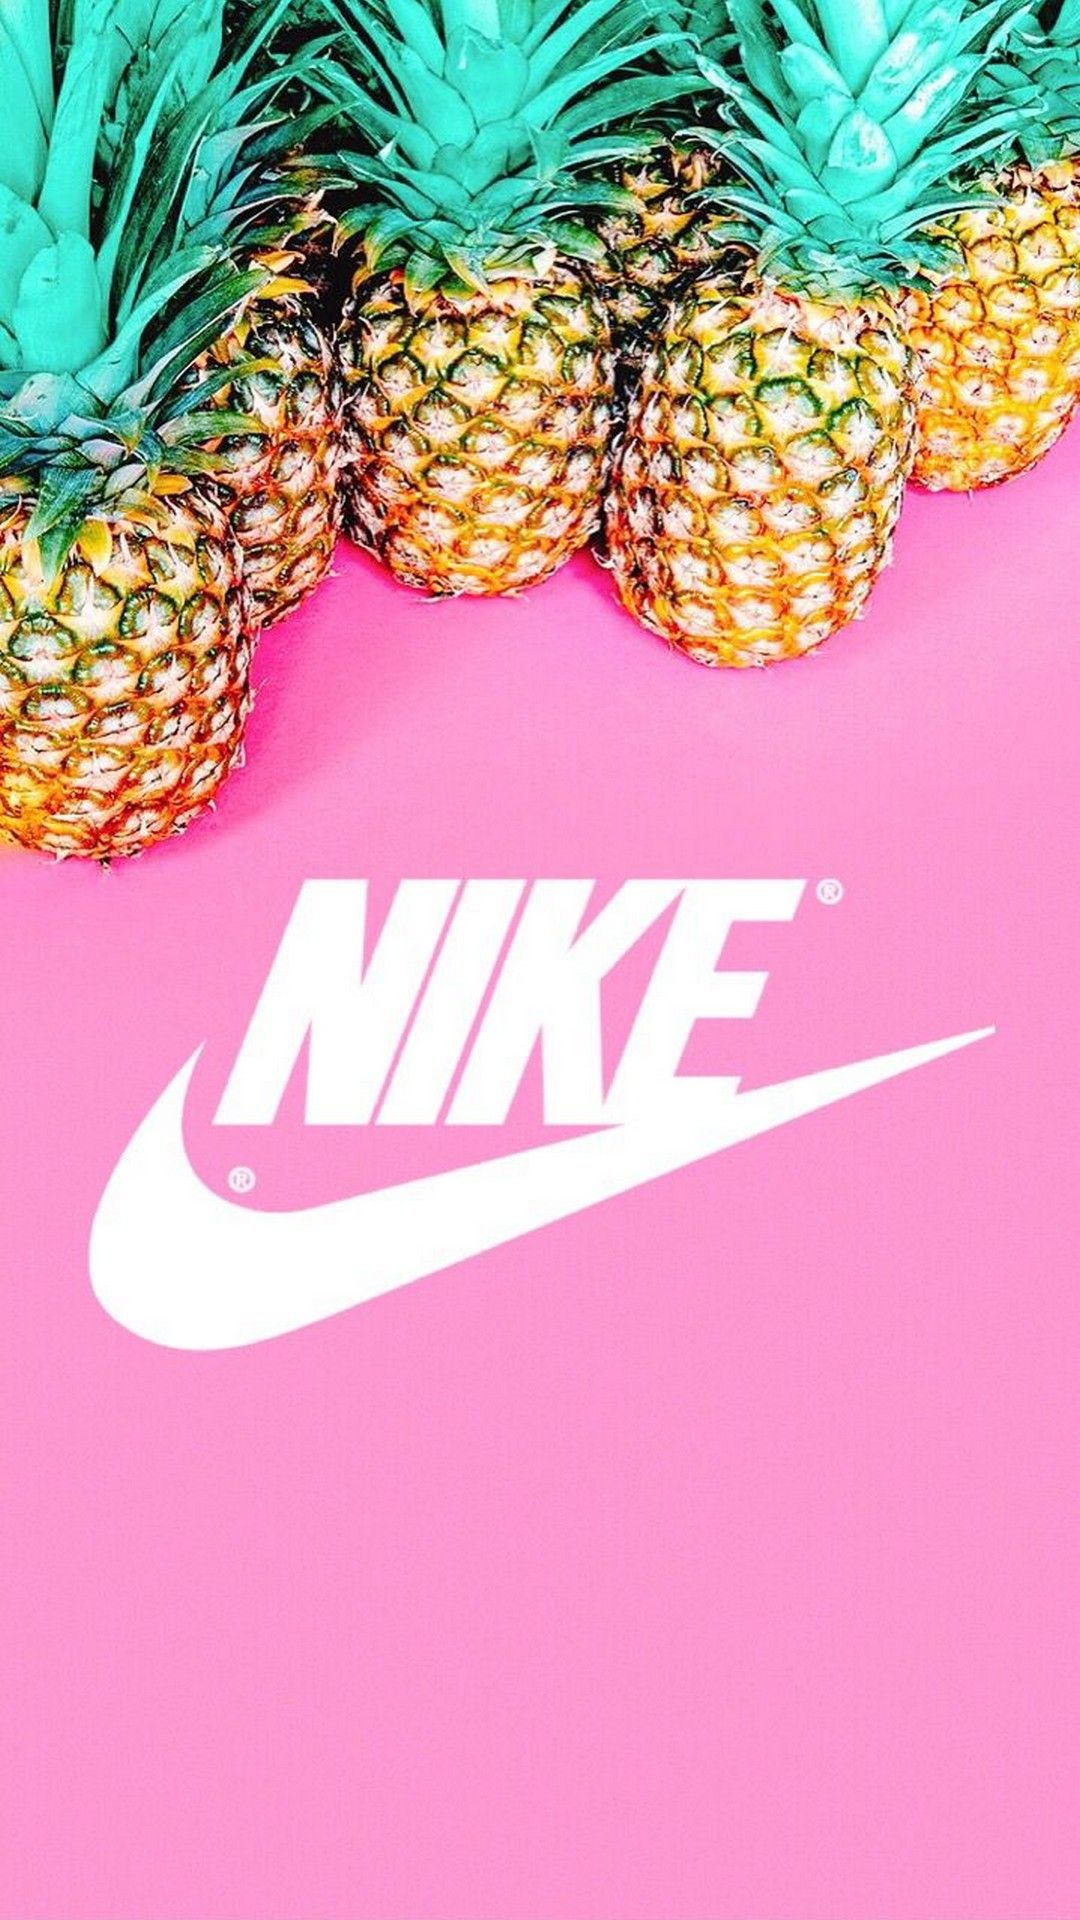 Pink Nike Wallpaper Android - Fondos de Android 2019